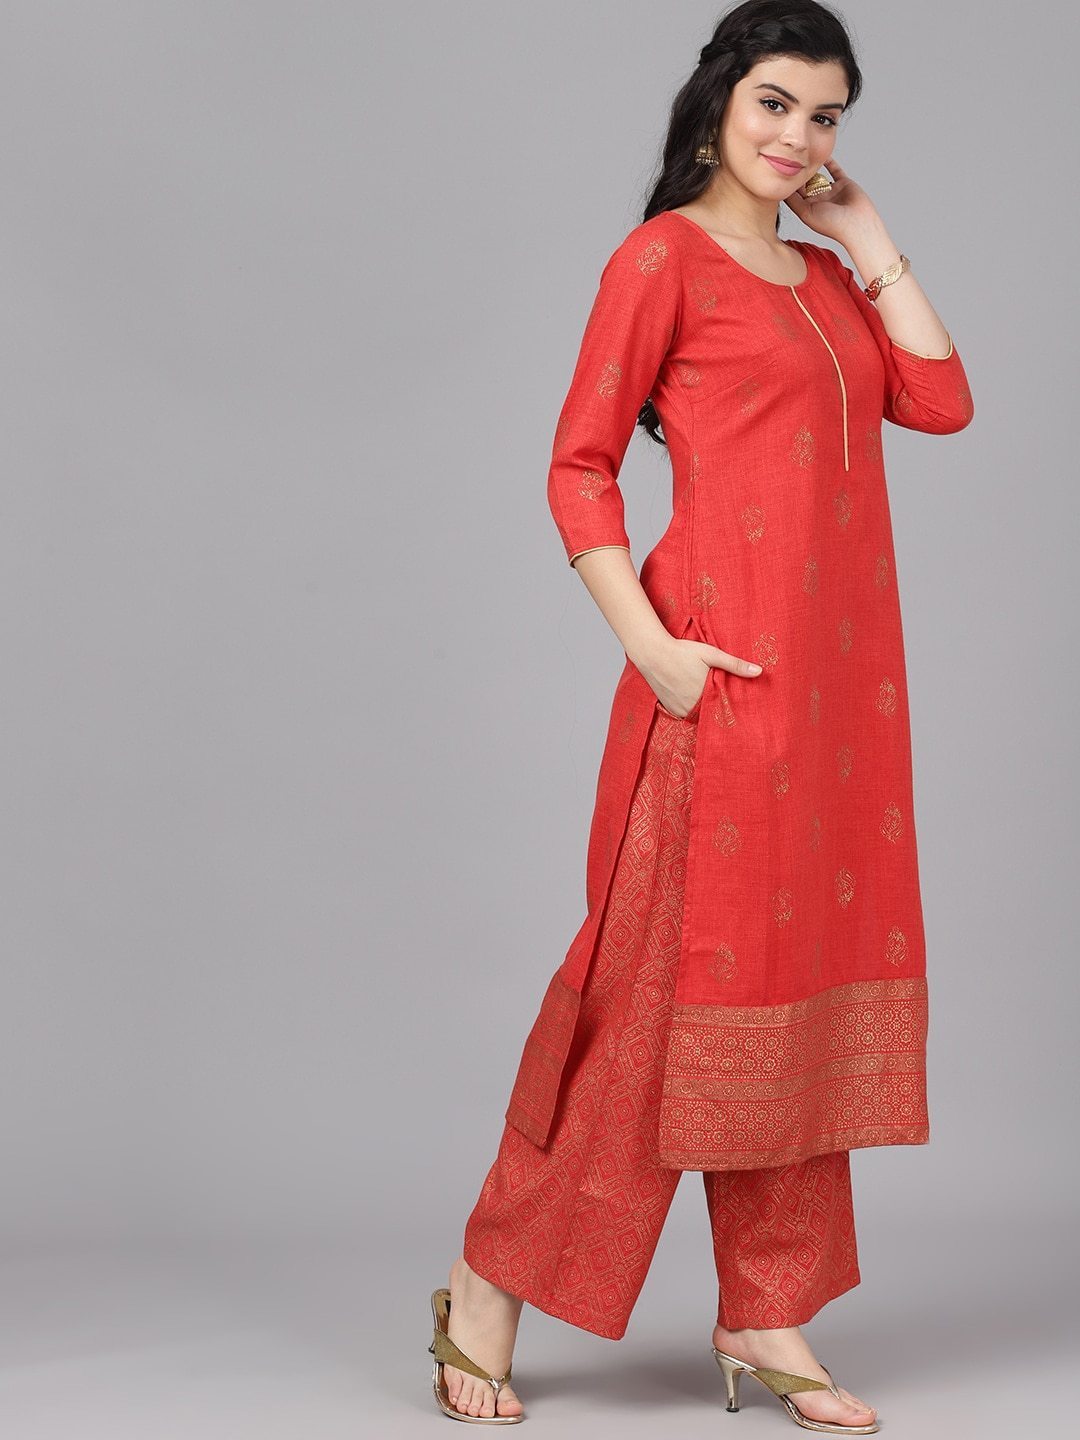 Women's  Red & Gold-Toned Printed Kurta with Palazzos - AKS